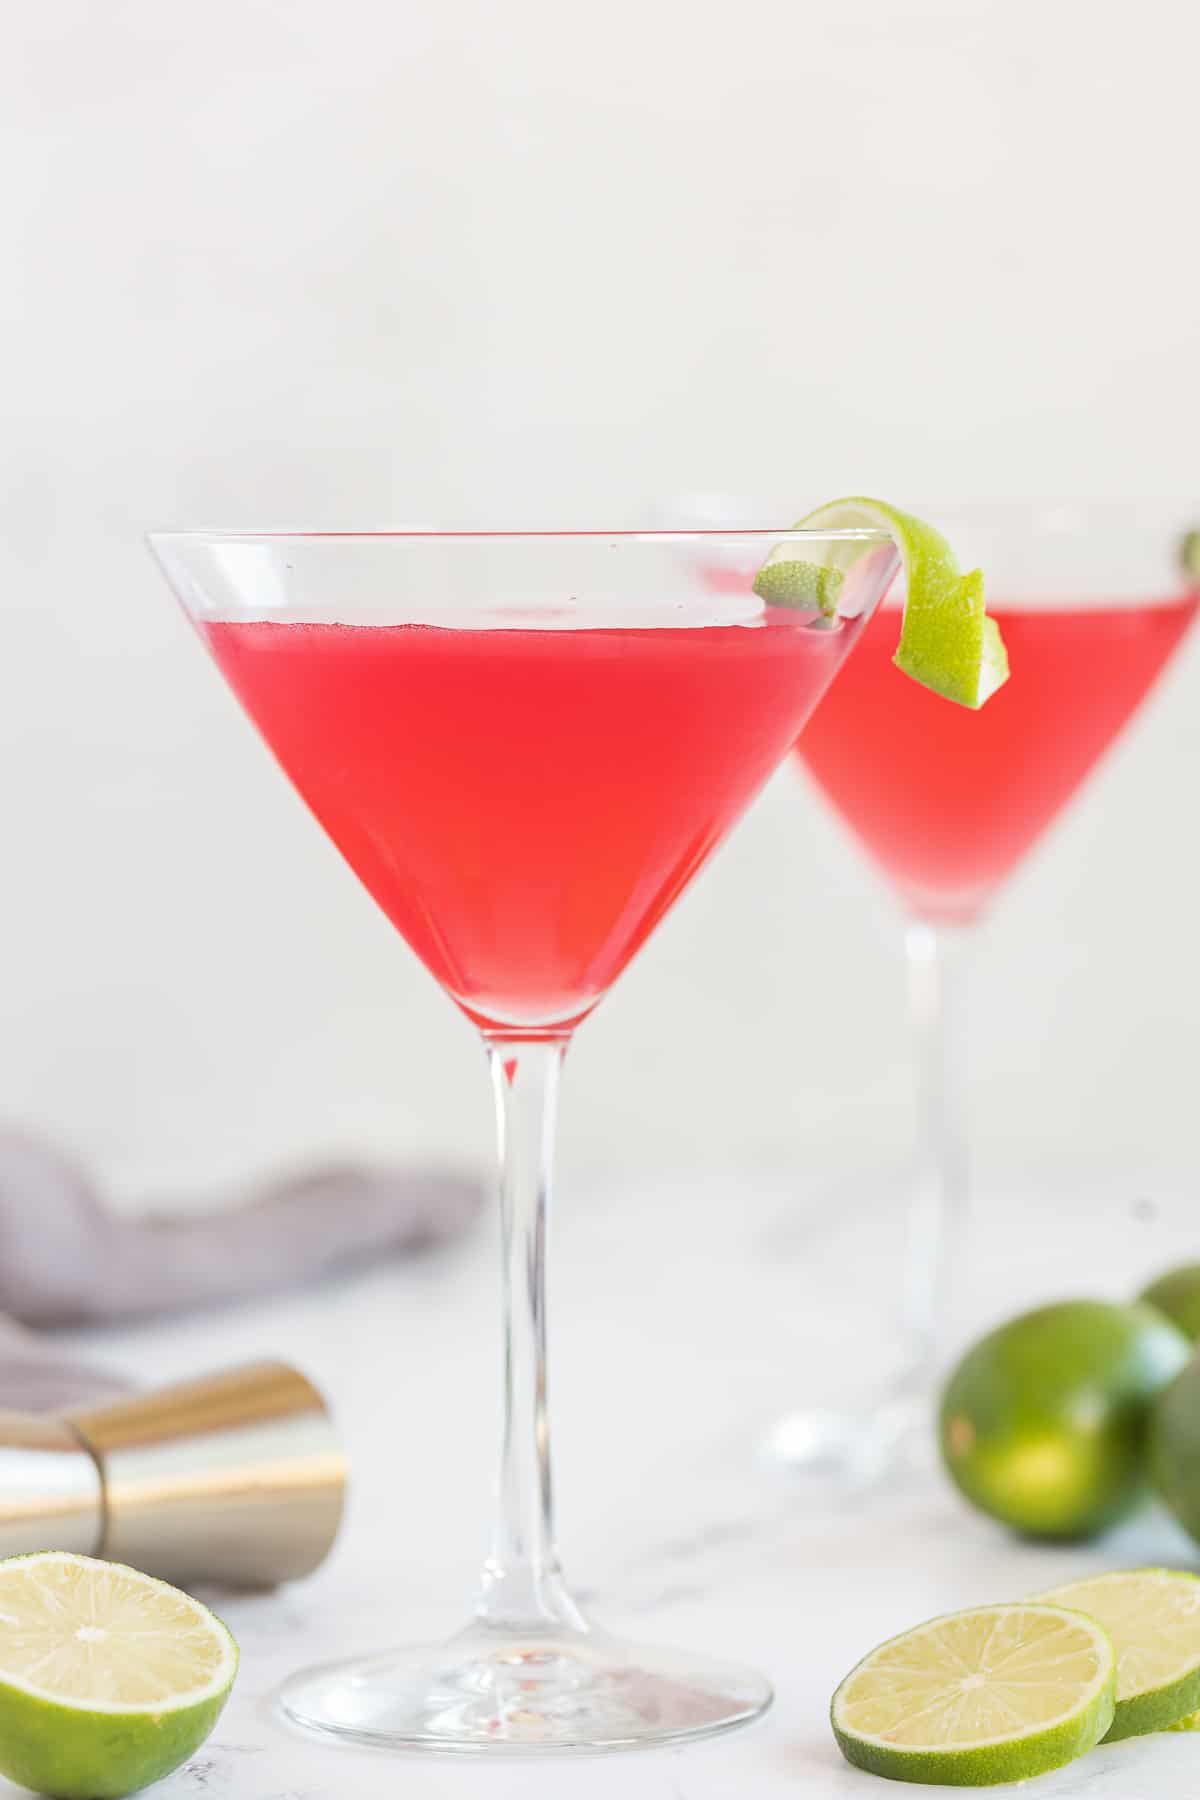 Two cosmos in martini glasses garnished with a twist of lime on the rim.